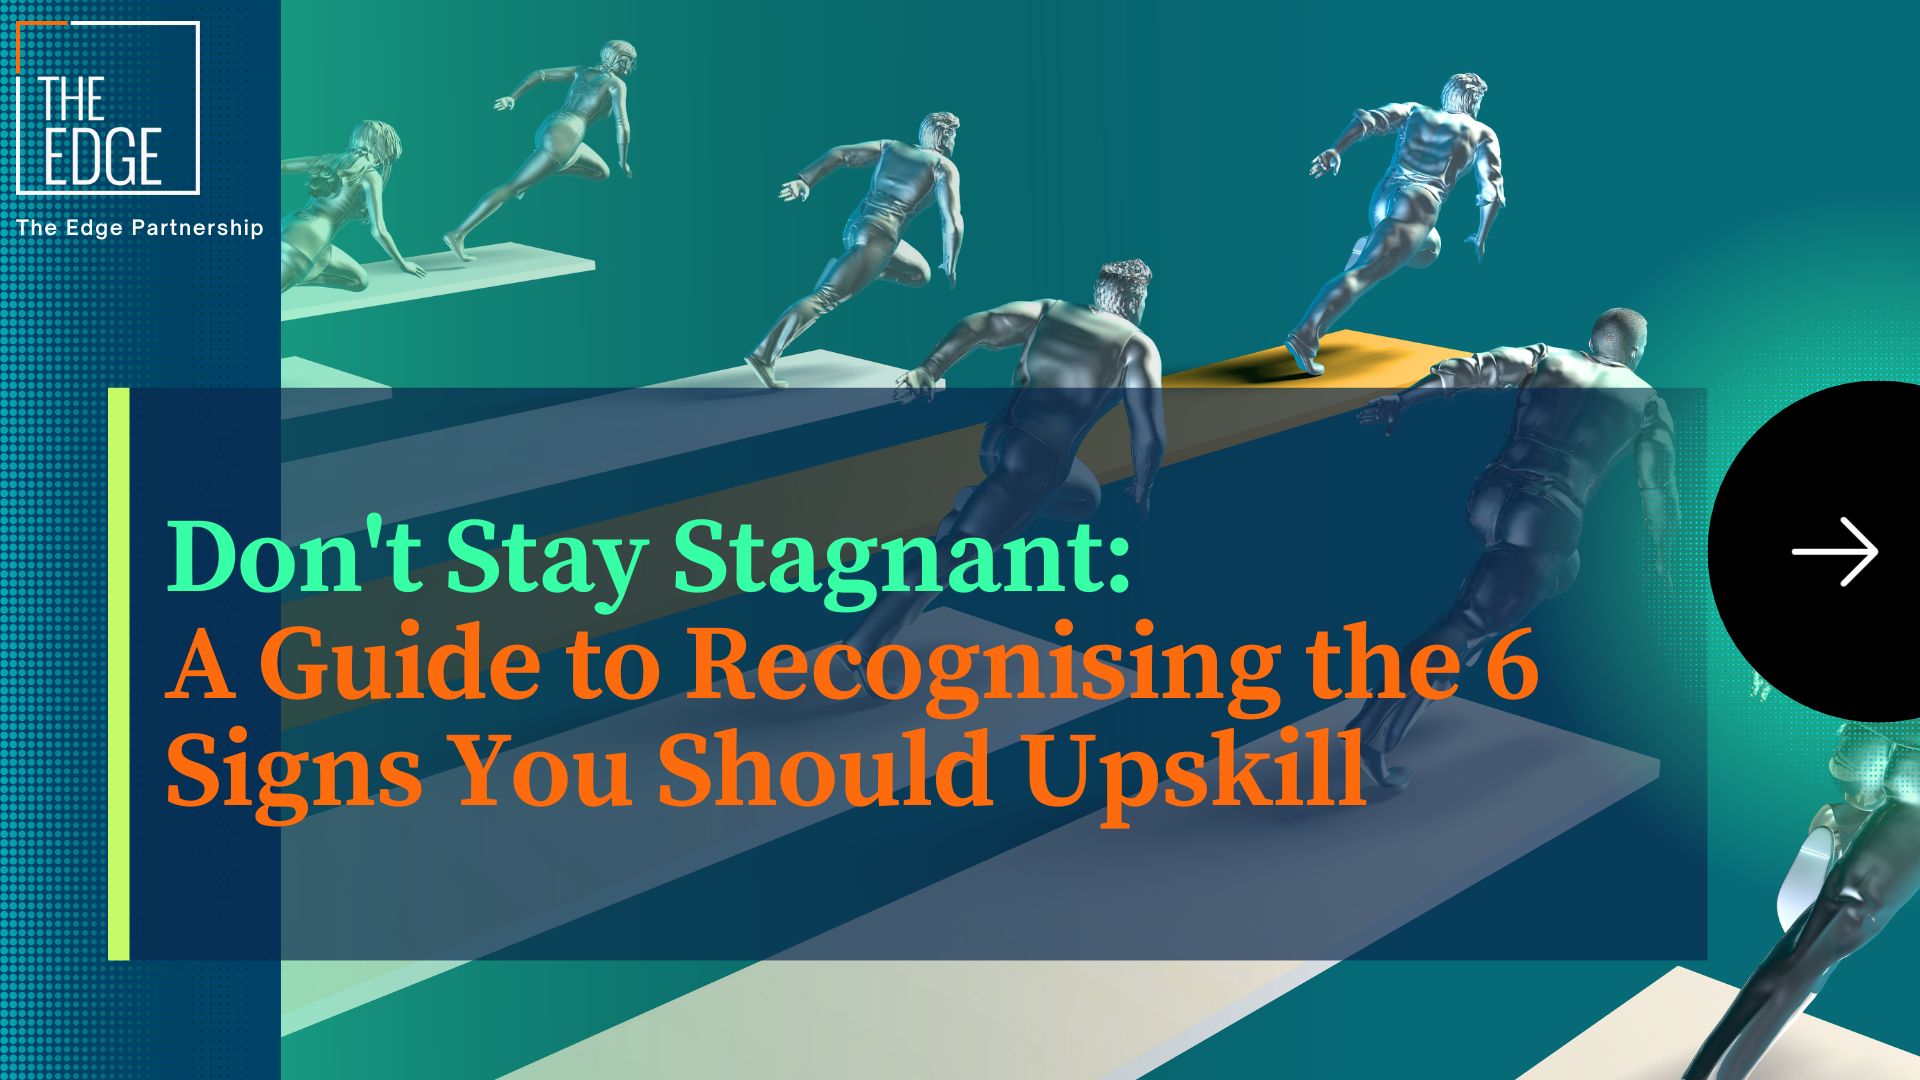 Don’t Stay Stagnant: A Guide to Recognising the 6 Signs You Should Upskill